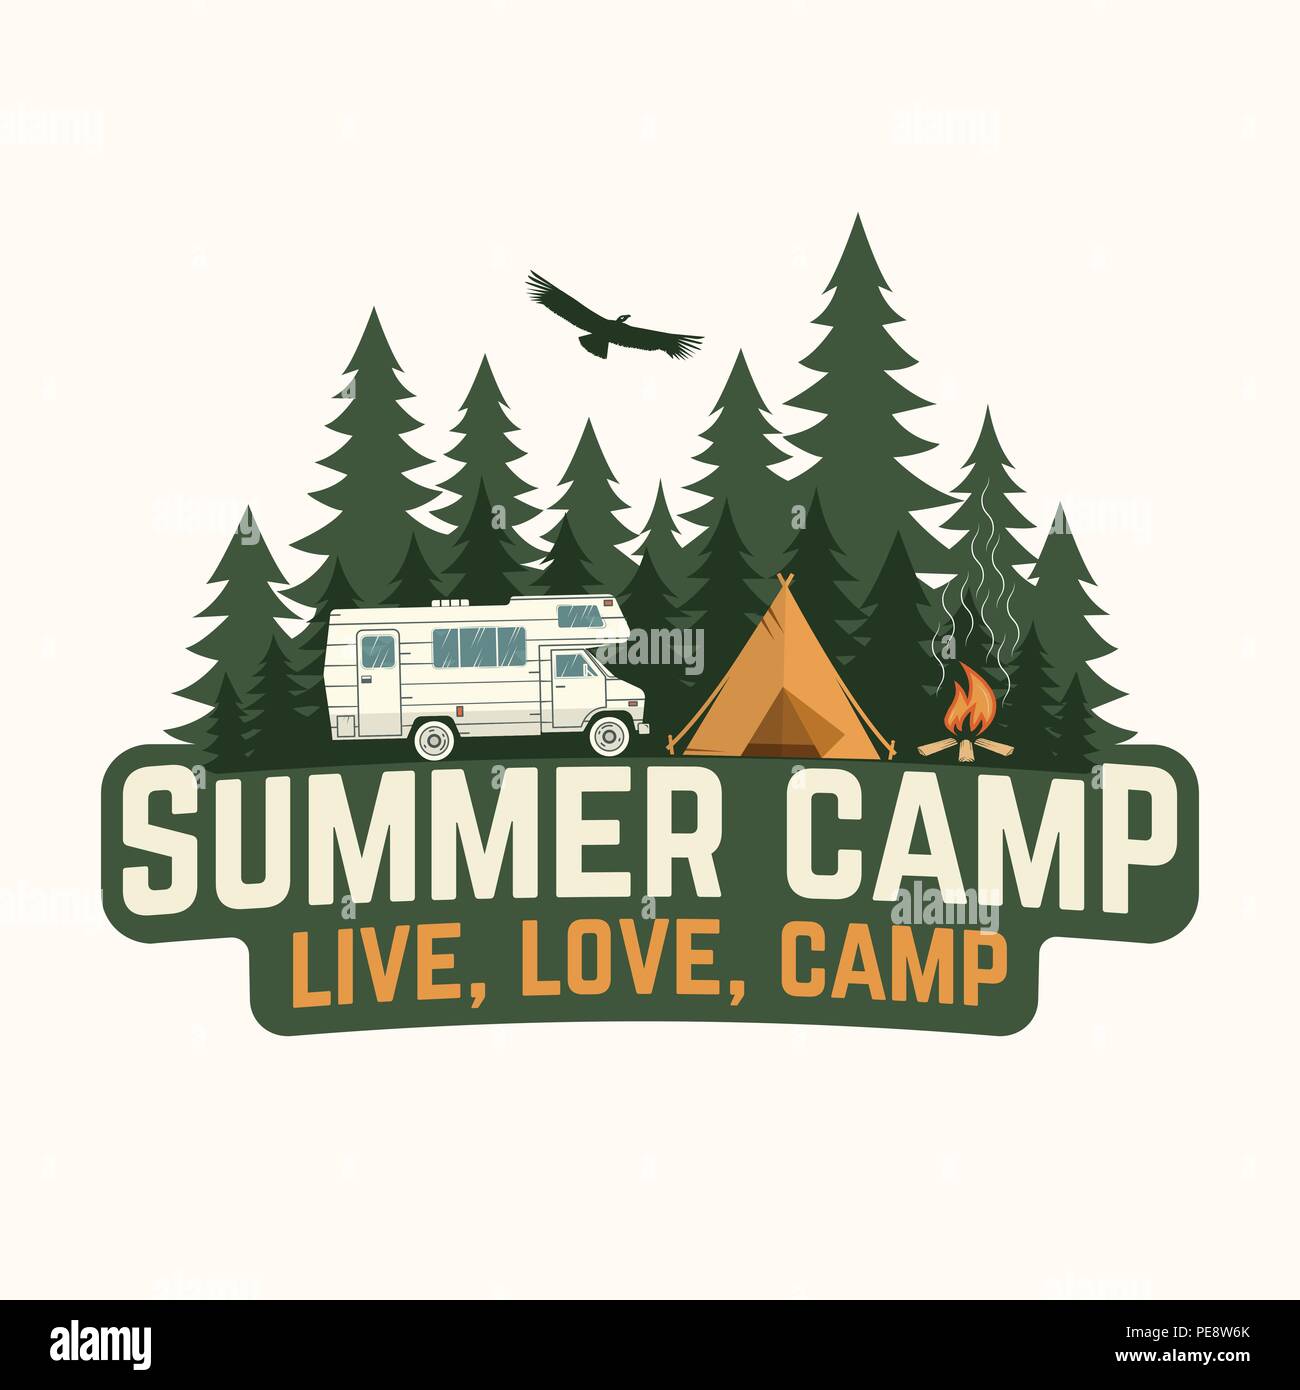 Summer camp. Vector illustration. Concept for shirt or logo, print, stamp or tee. Vintage typography design with rv trailer, camping tent and forest silhouette. Stock Vector